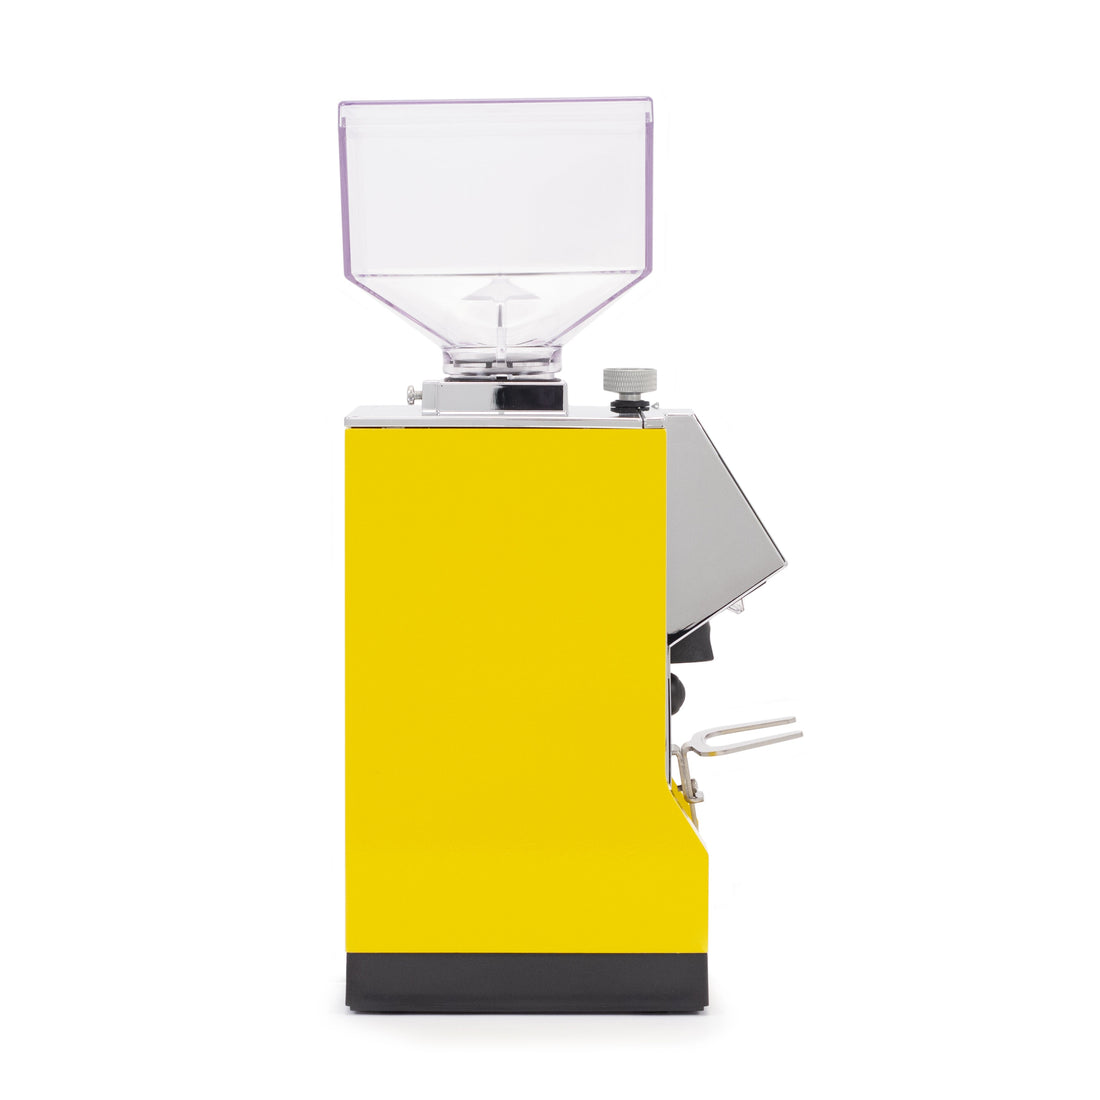 Eureka Mignon Magnifico Coffee Grinder in Yellow Right Facing || yellow